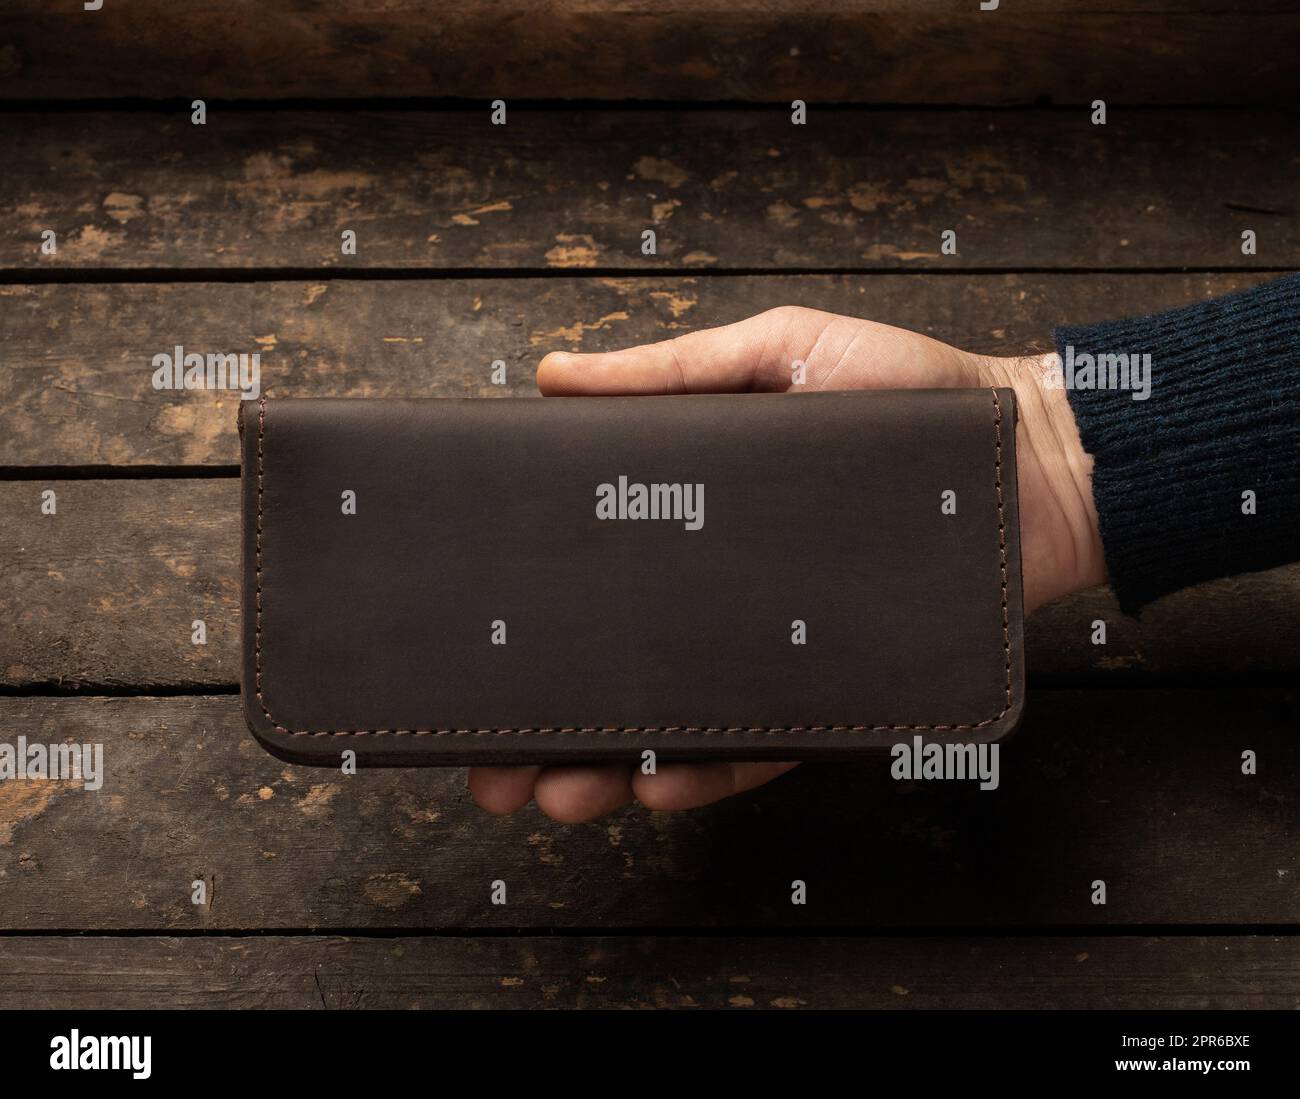 Leather men's wallet in a man's hand on a vintage wooden background Stock Photo